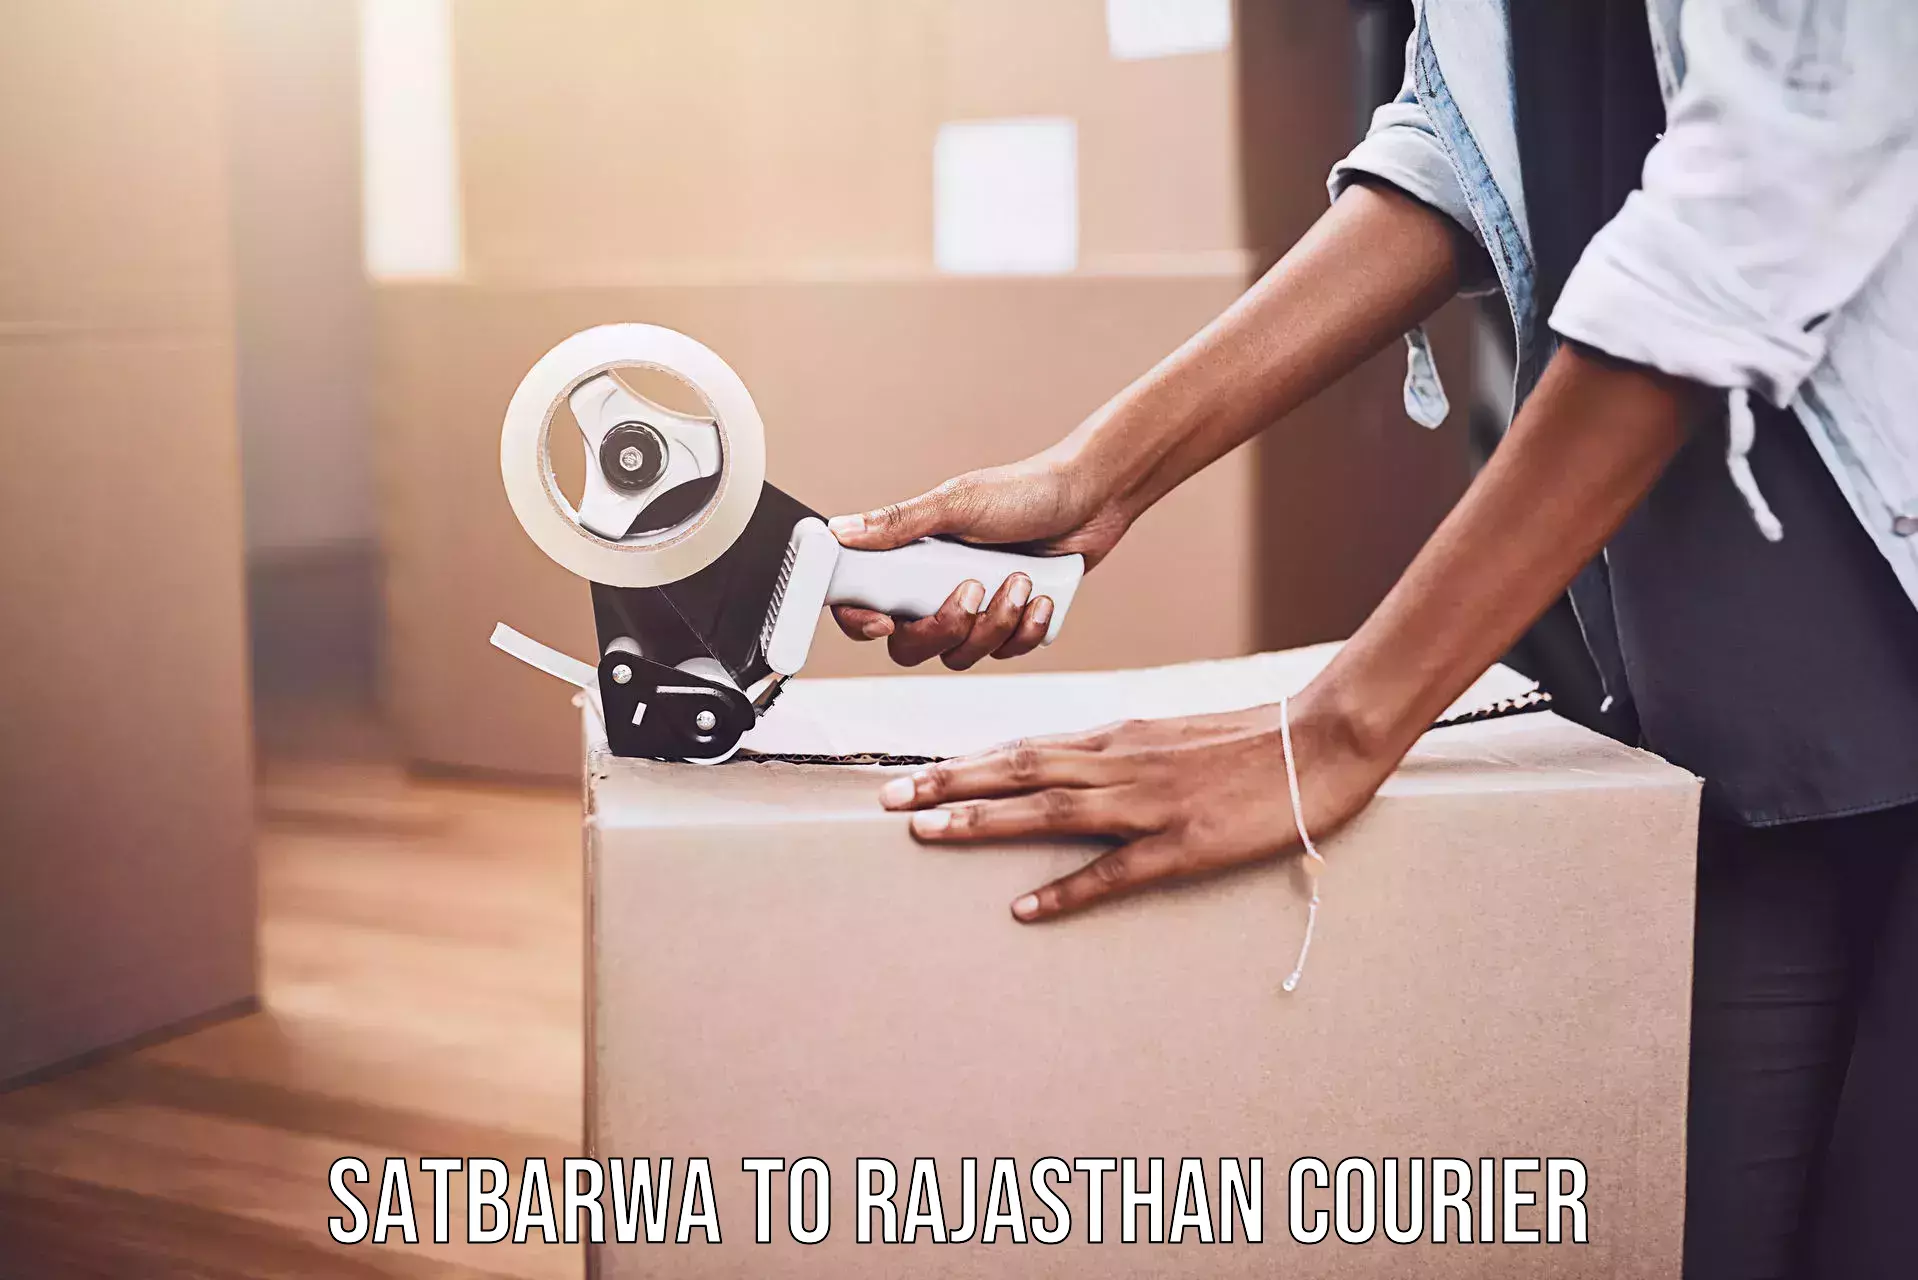 Next-day delivery options Satbarwa to Bari Dholpur